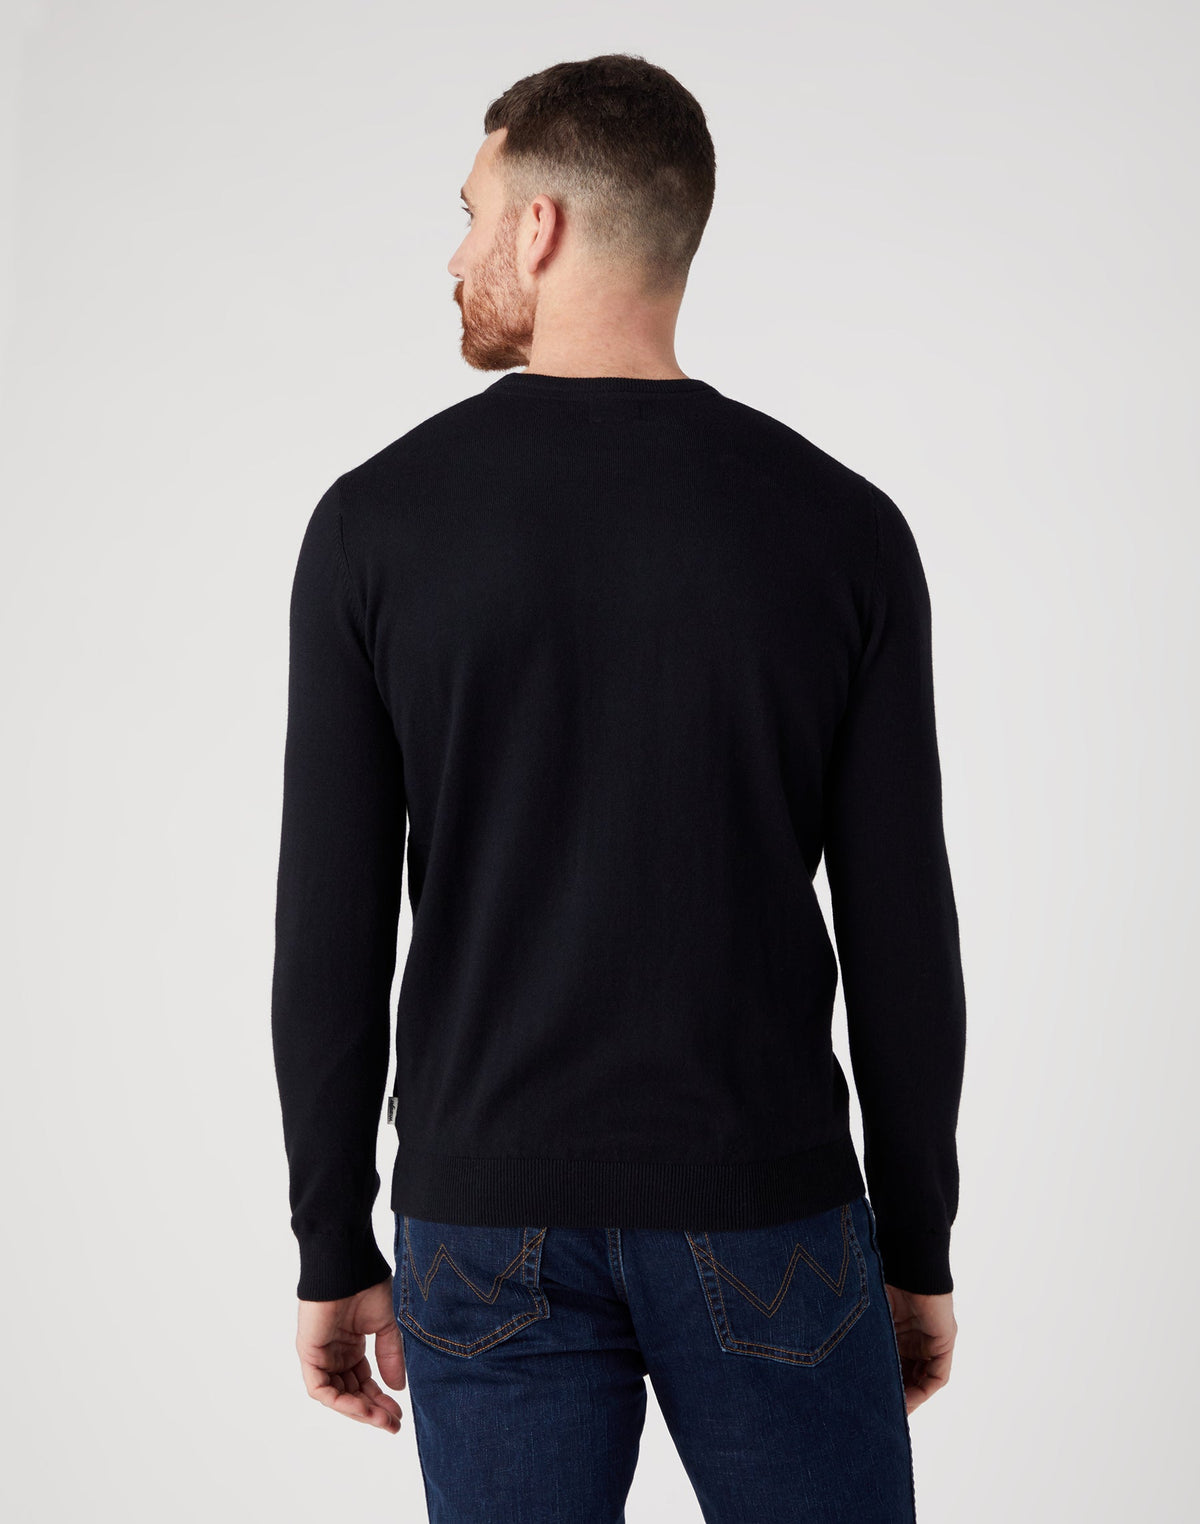 Crewneck Knit in Real Black